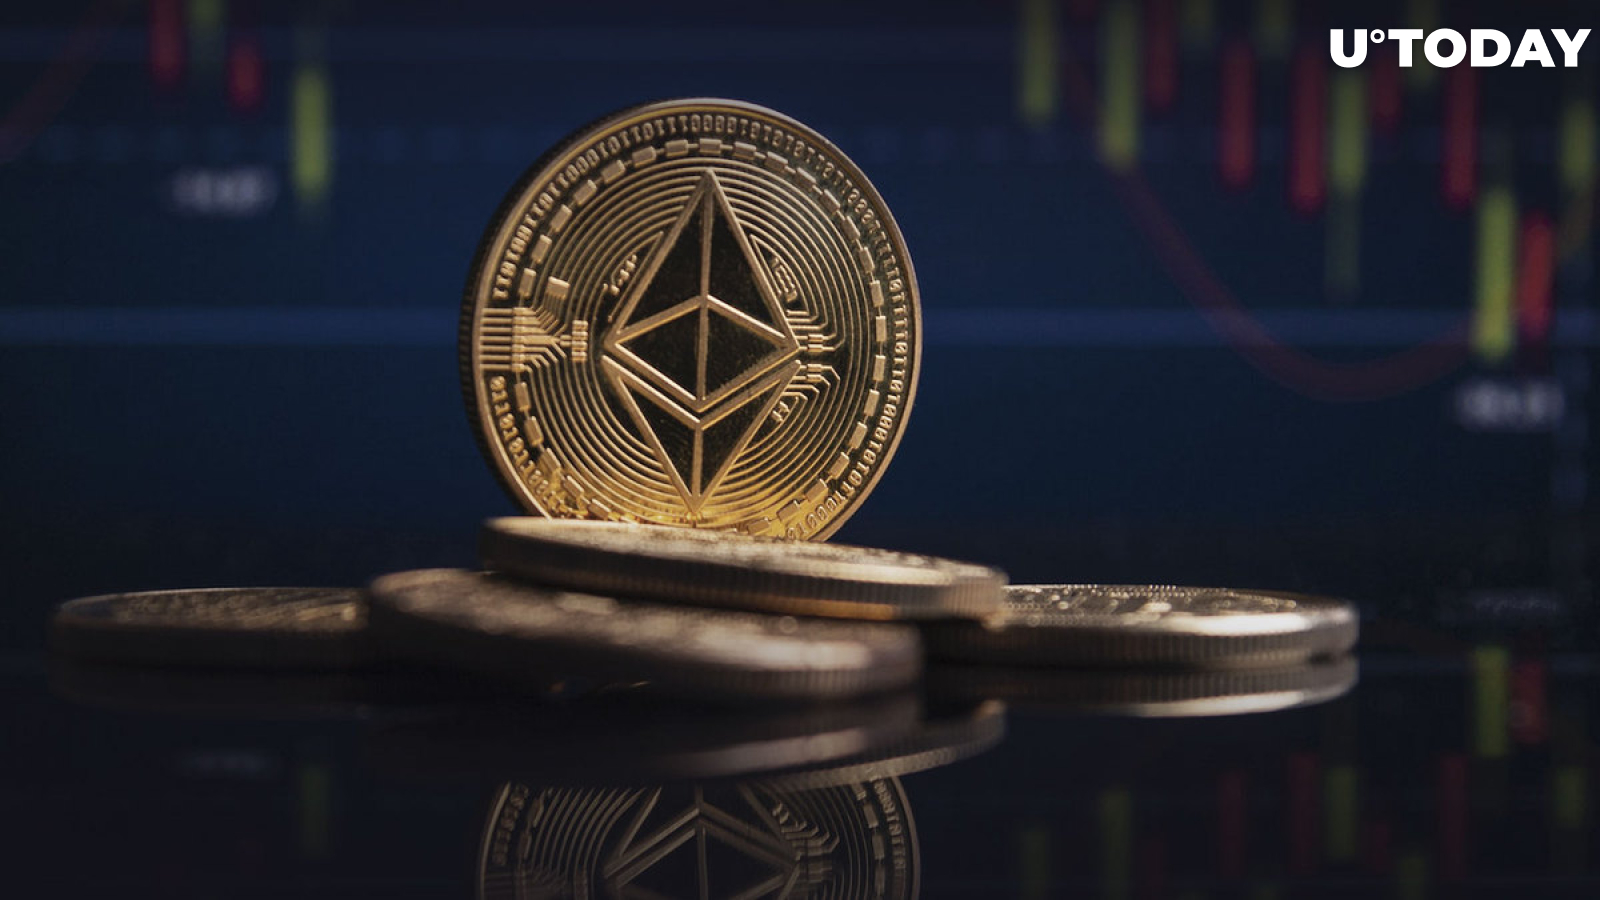 Someone Paid Enormous 20 ETH as Transaction Fee on Ethereum, Here's What's Happening